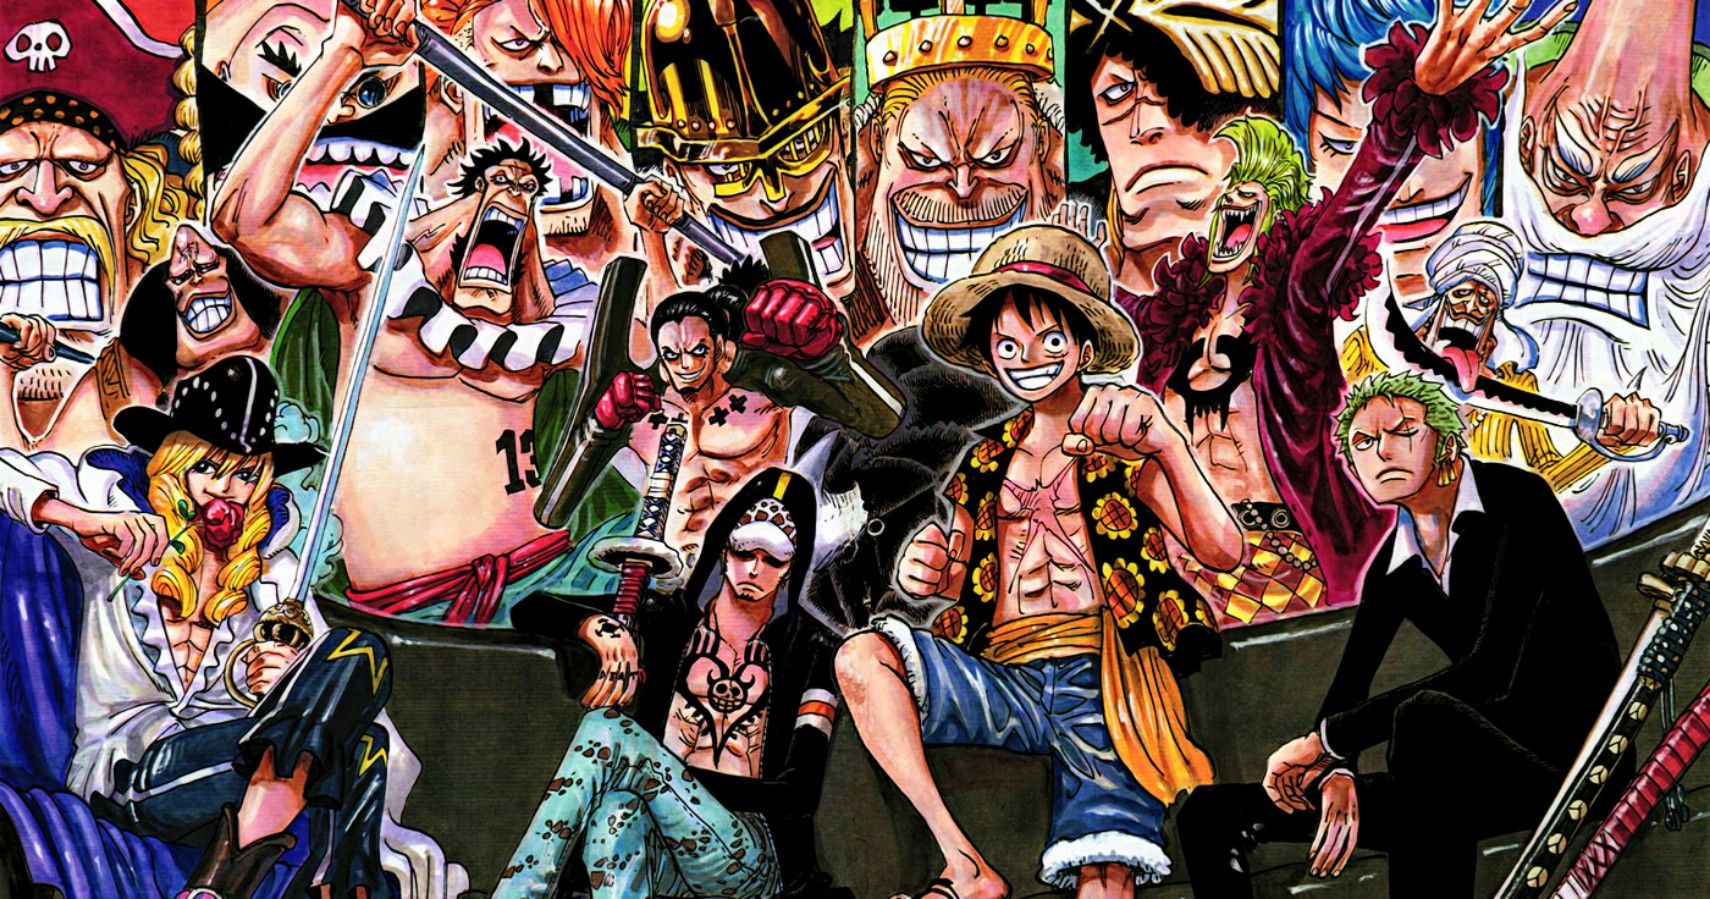 Luffy surrounded by the seven captains of the Straw Hat Grand Fleet and the enemies they face.